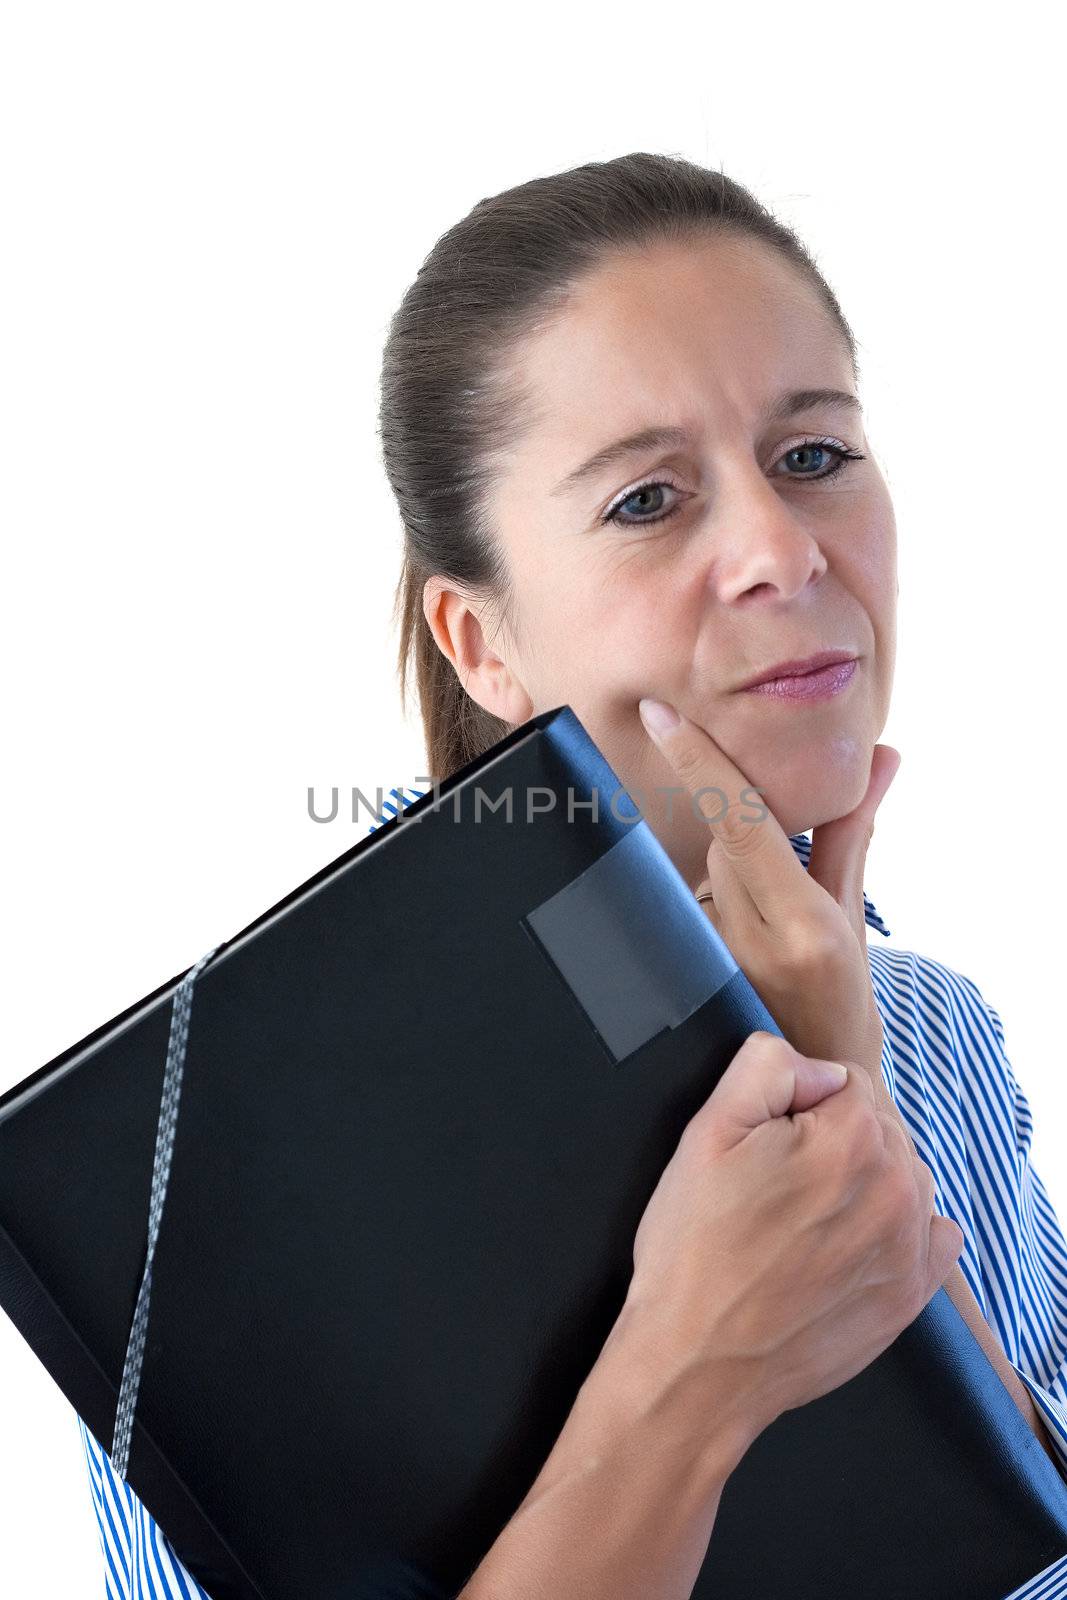 Middle aged business woman looking thoughtful holding a black file on a white background